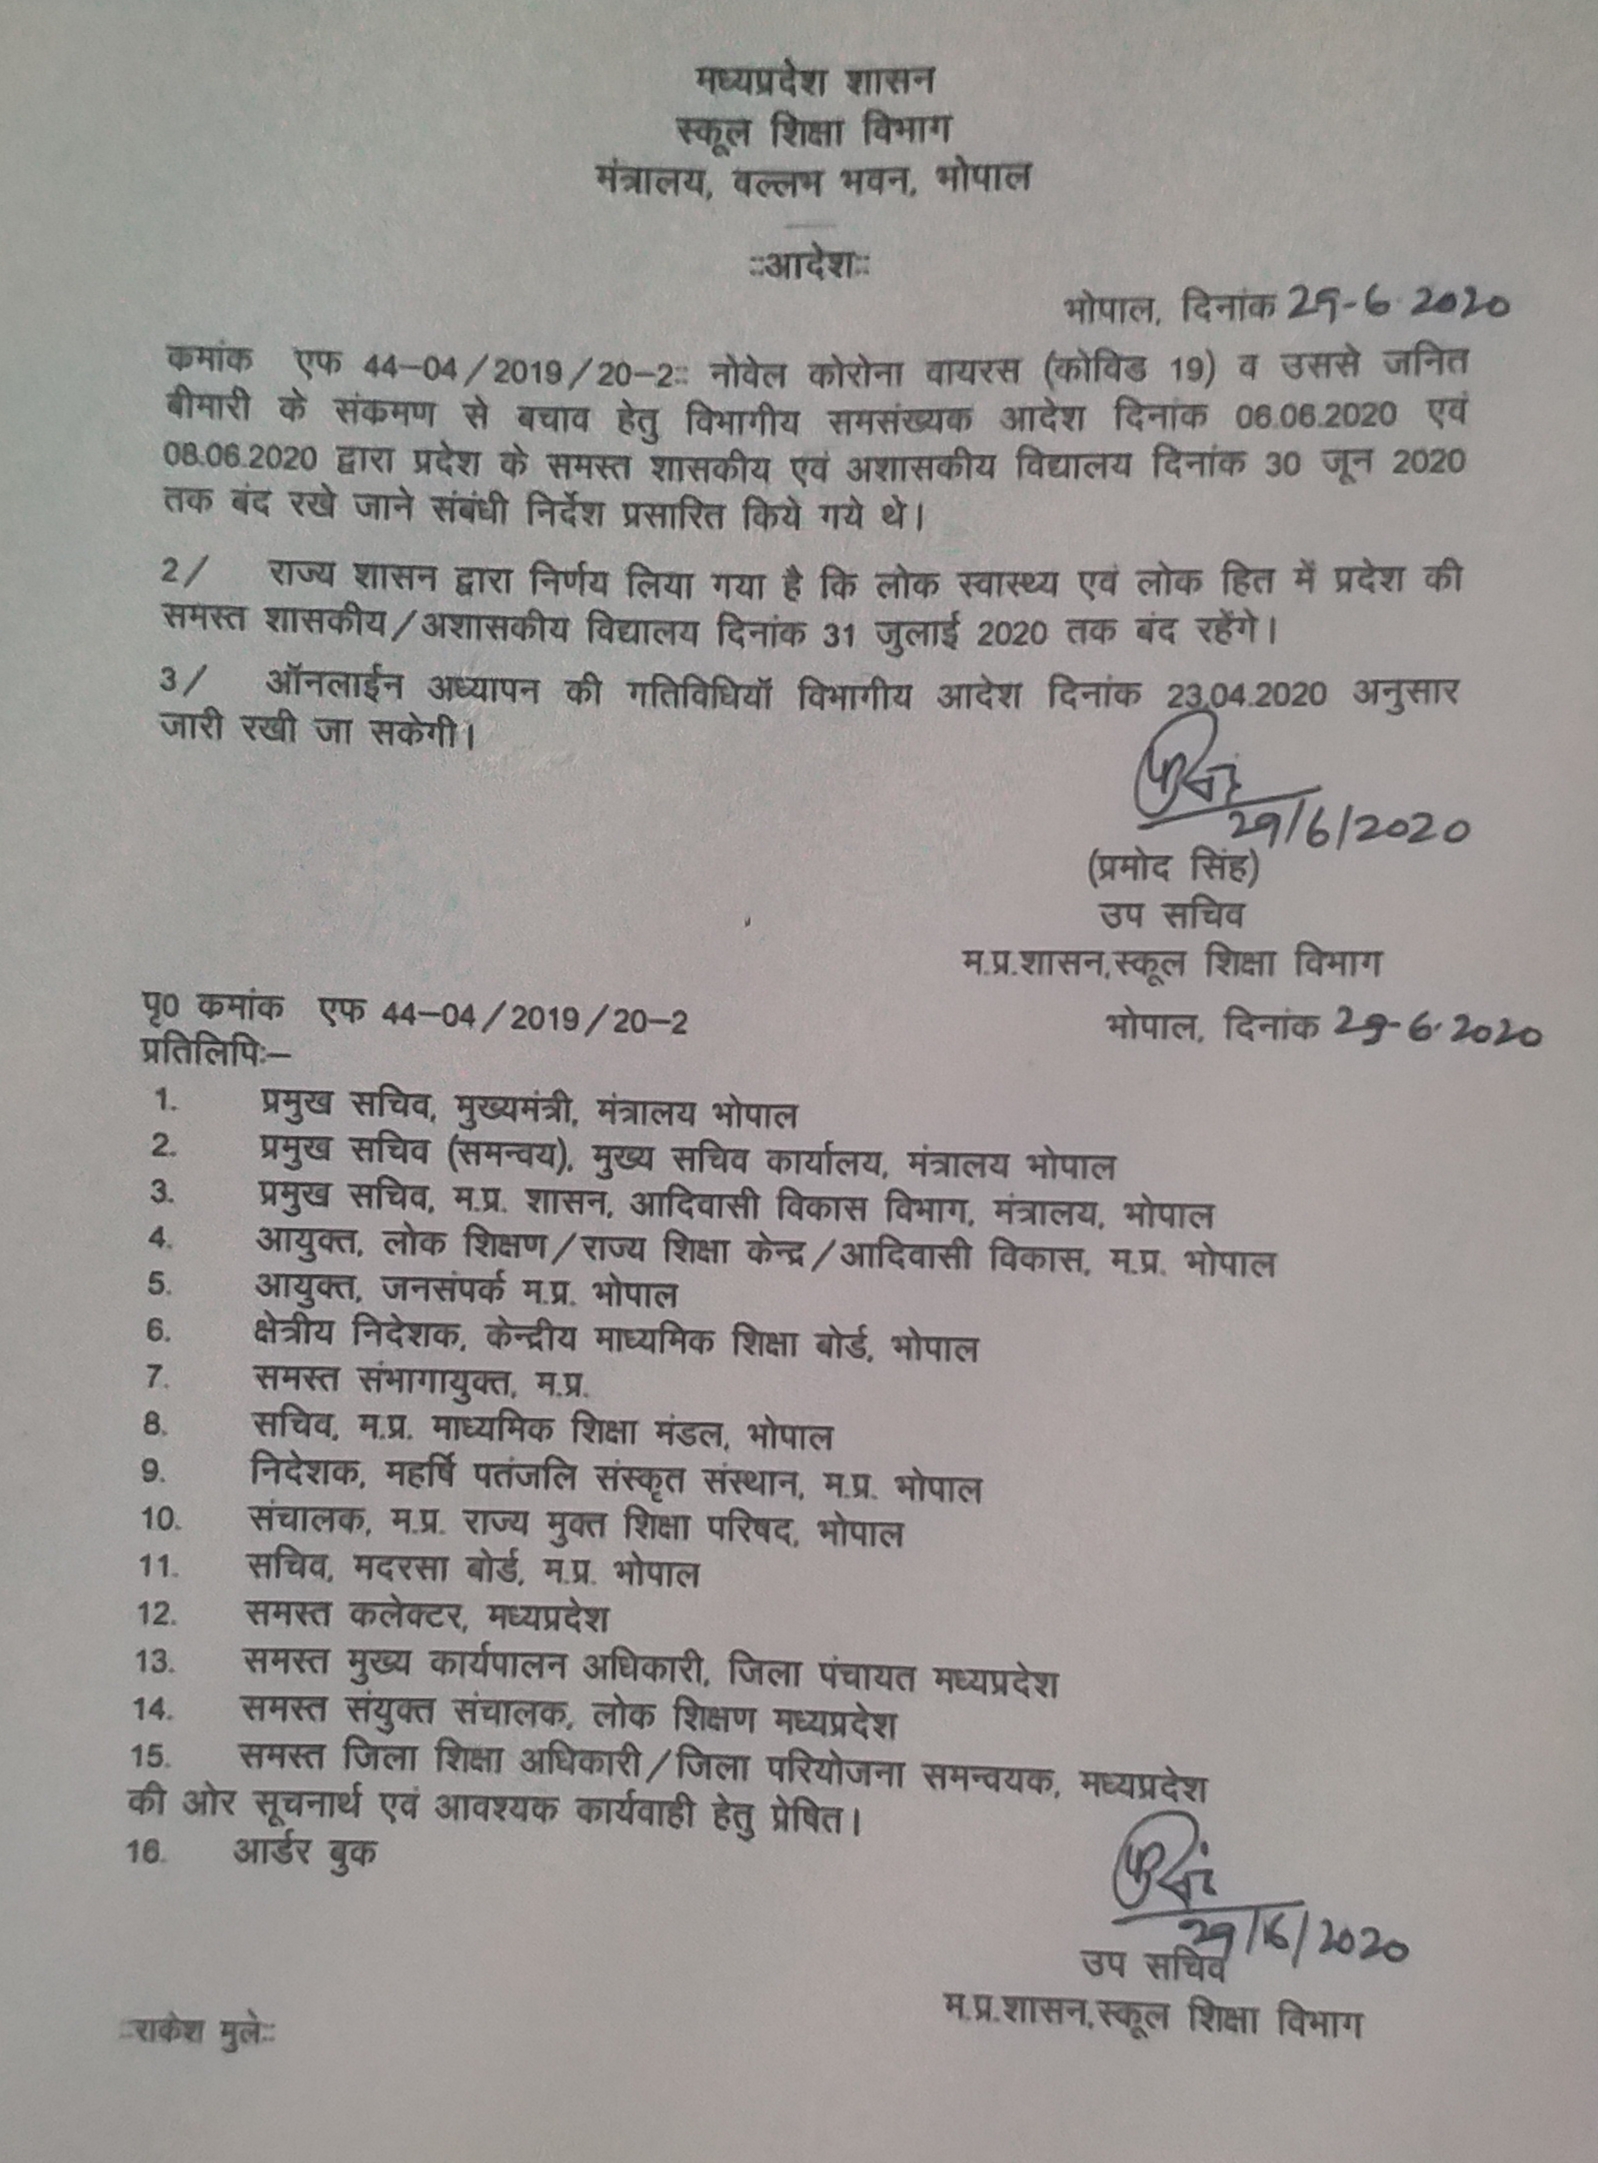 Government and private schools will remain closed till 31 July in Madhya Pradesh